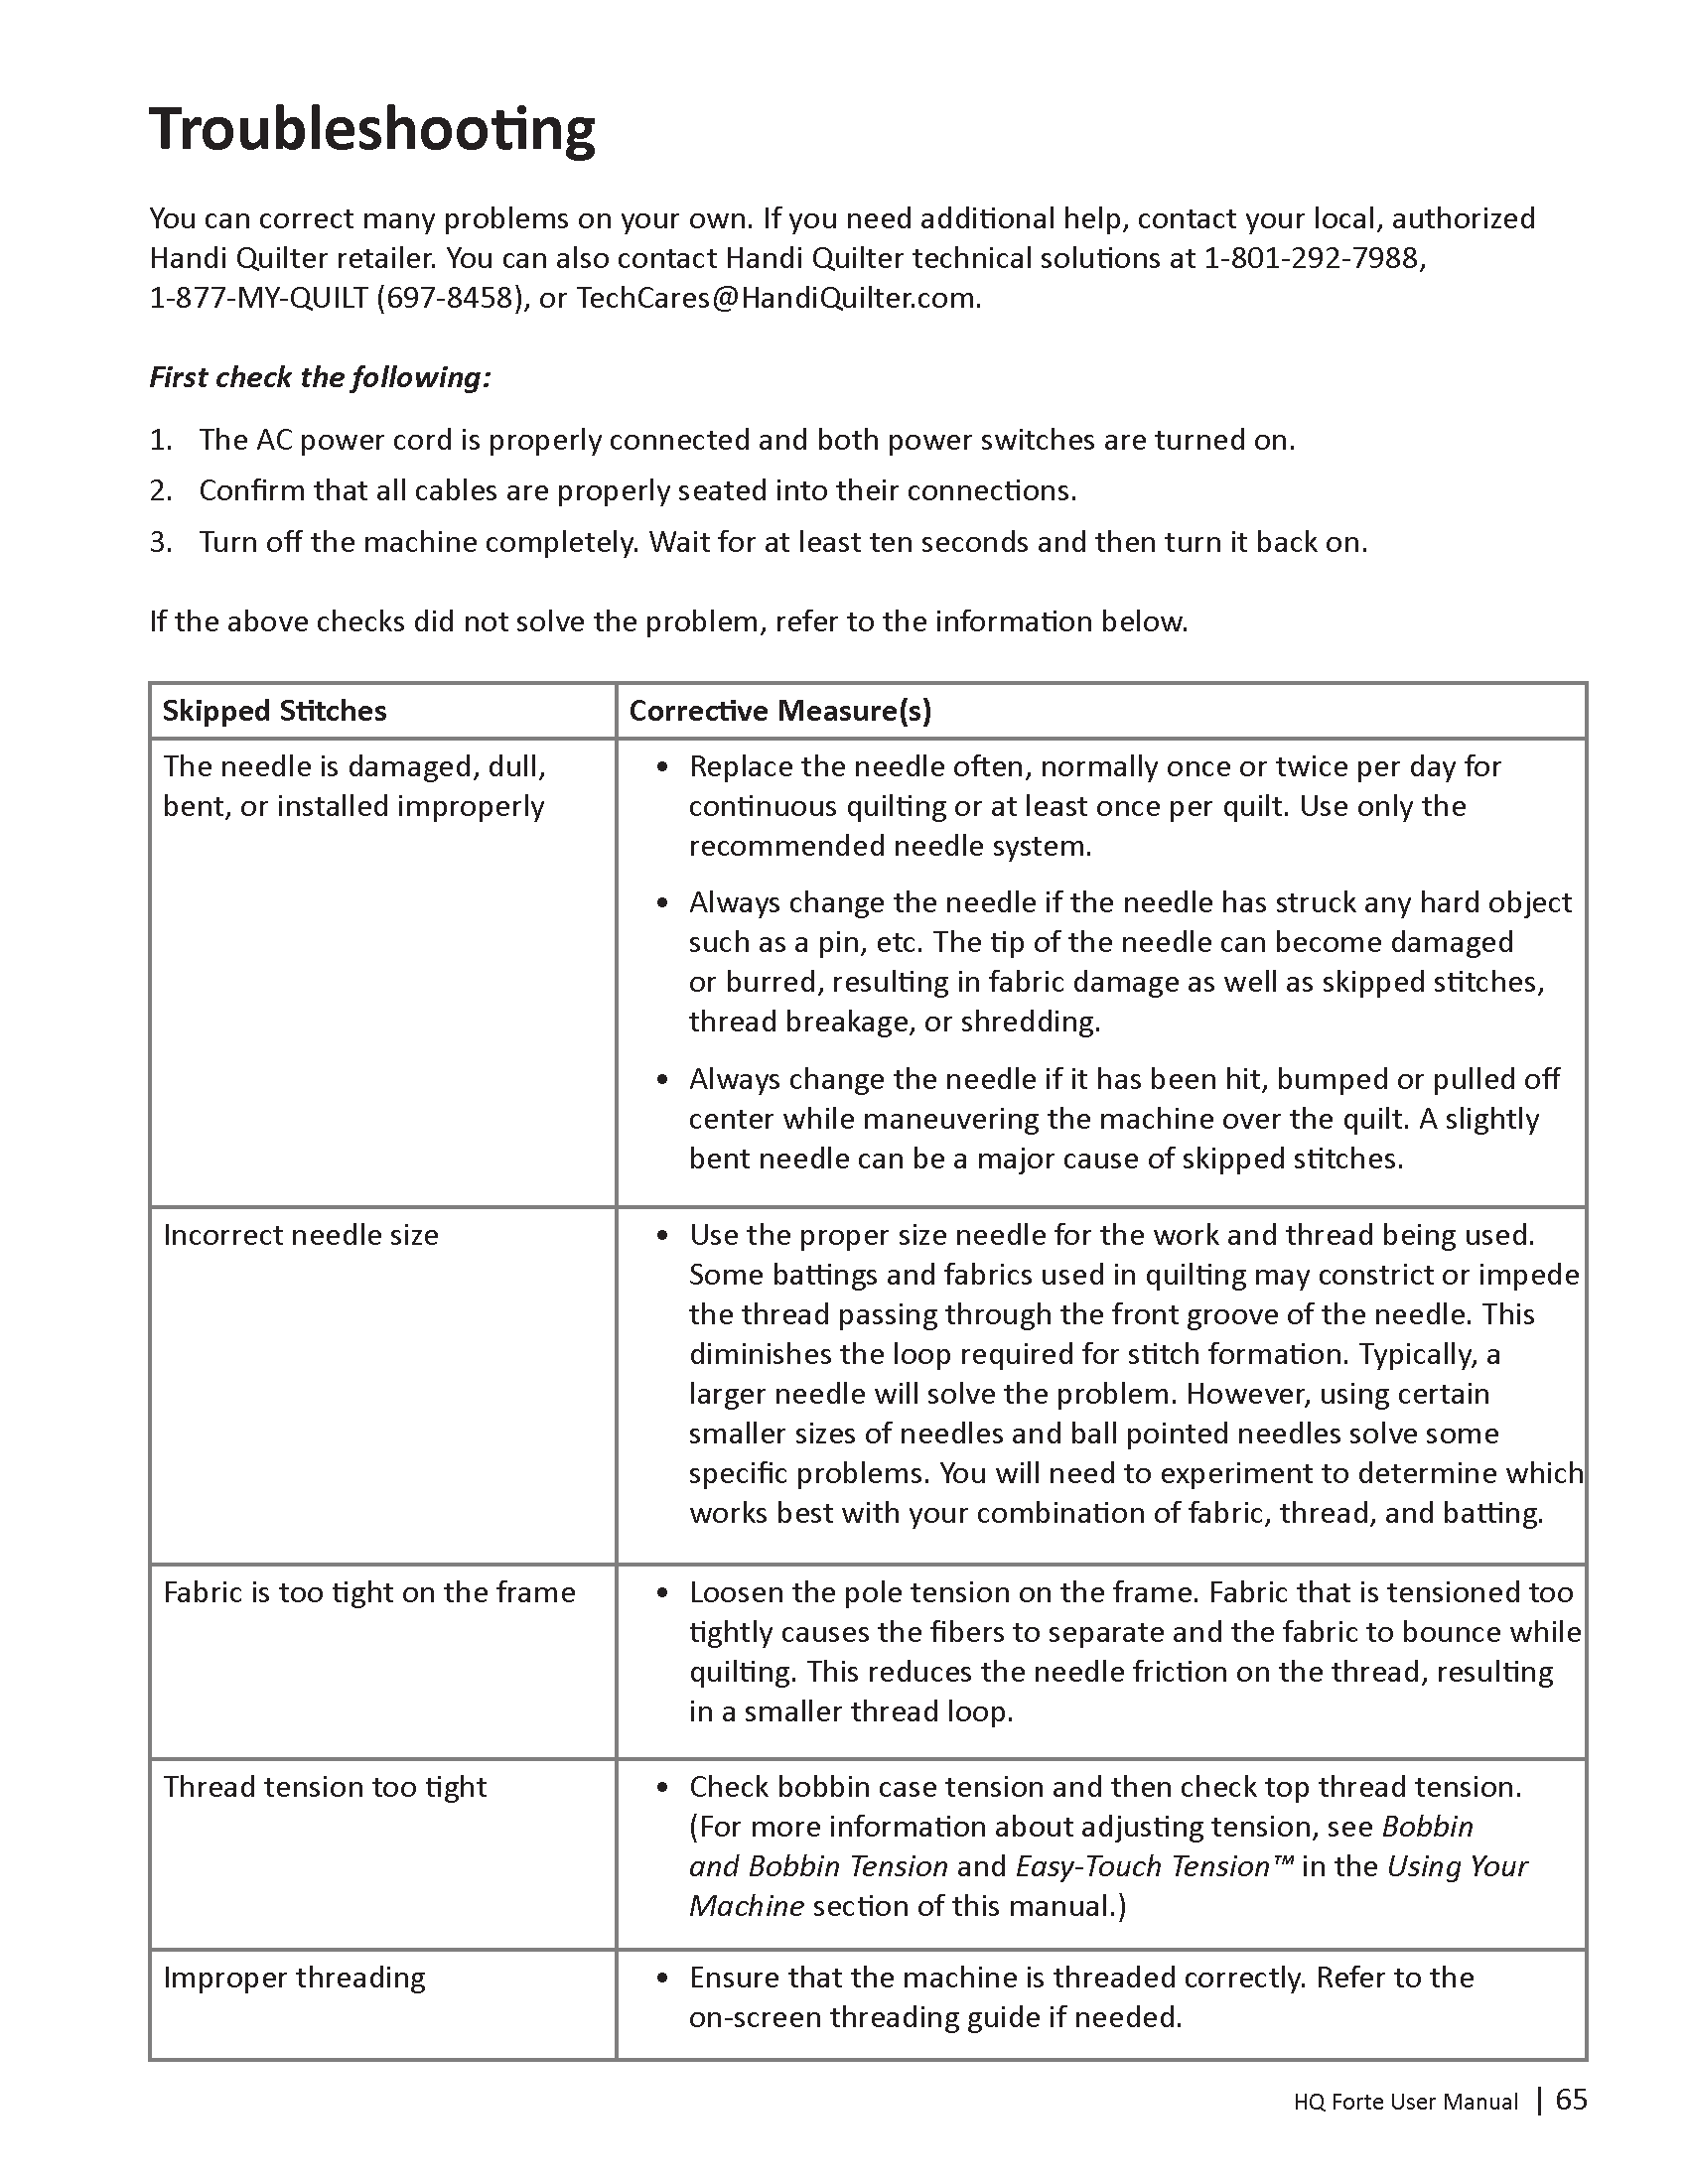 HQ-Forte-User-Manual-ALL-2_Page_66.png